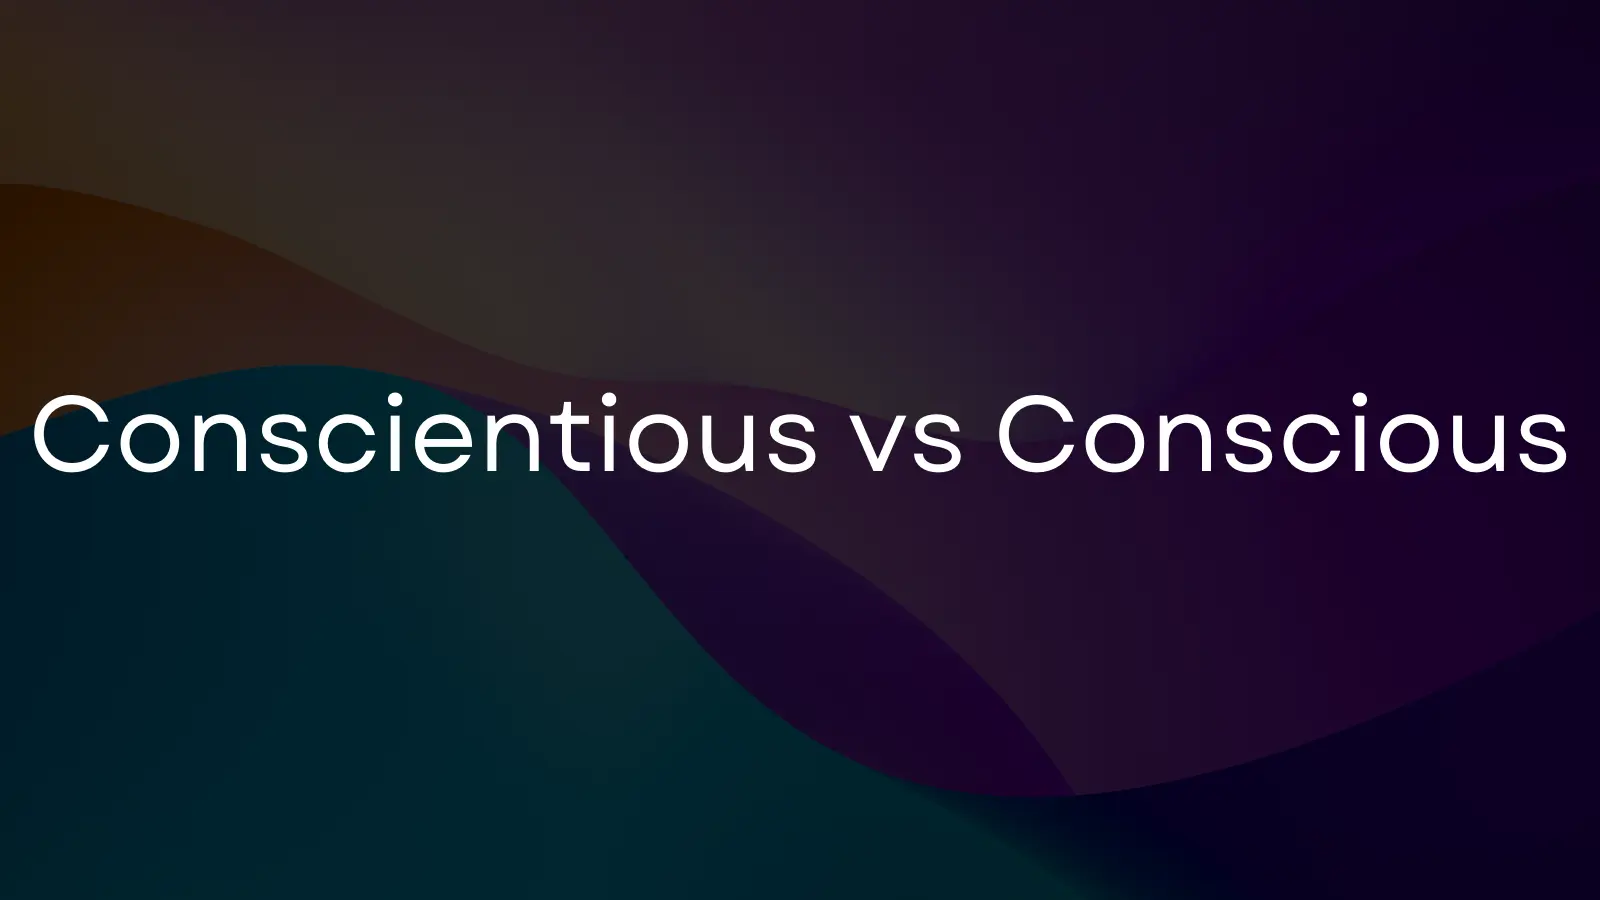 Conscientious vs. Conscious: How to remember the difference